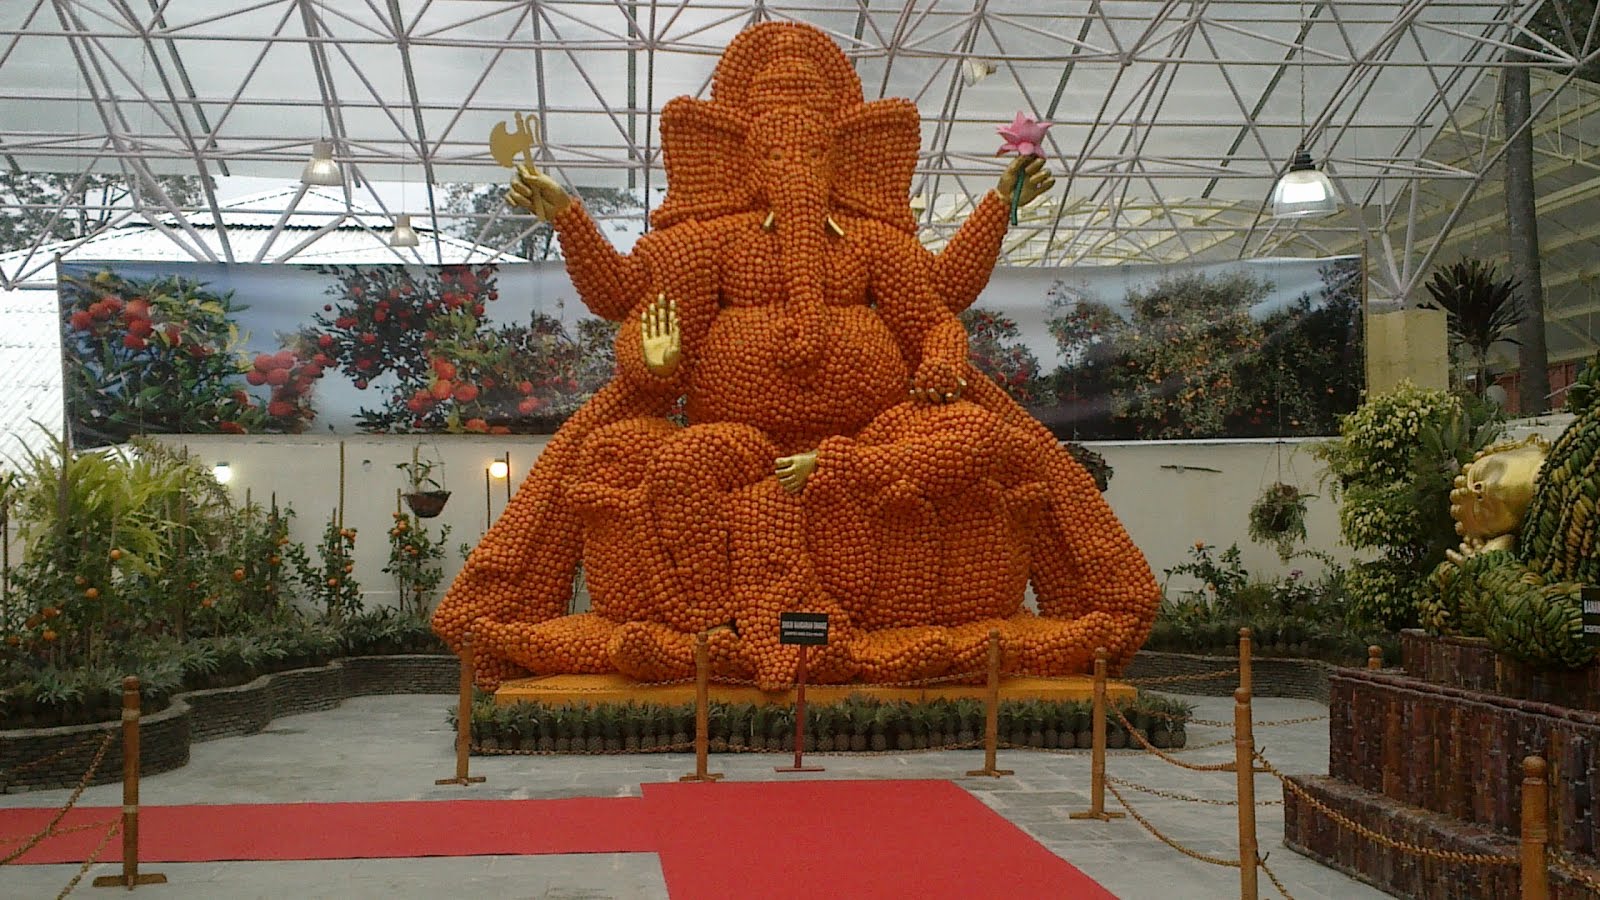 Lord Ganesh made of oranges